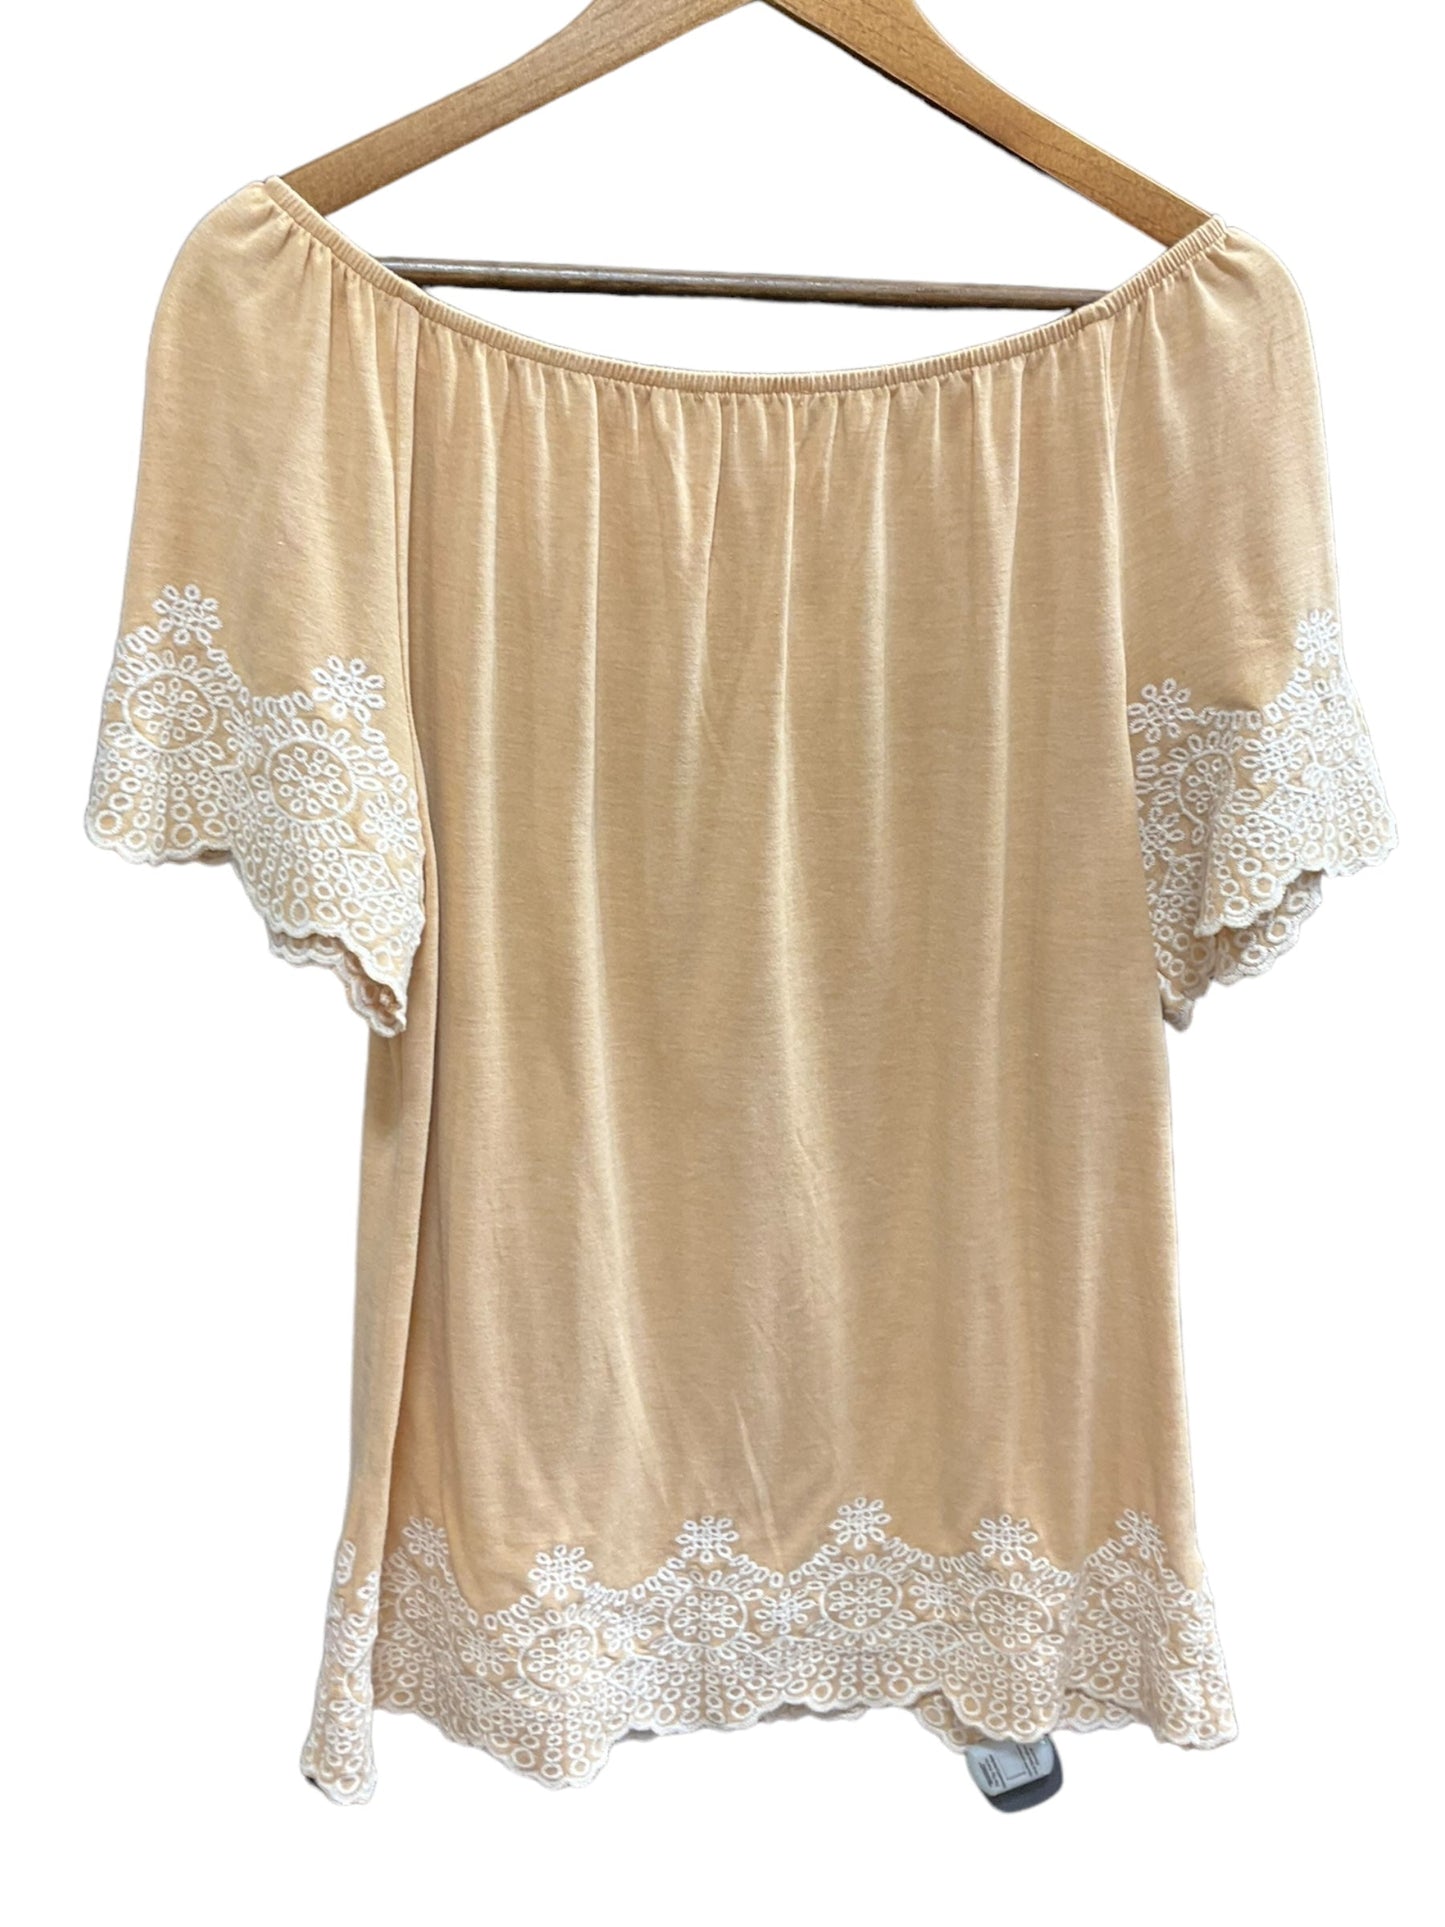 Tan Top Short Sleeve Basic Adrianna Papell, Size M